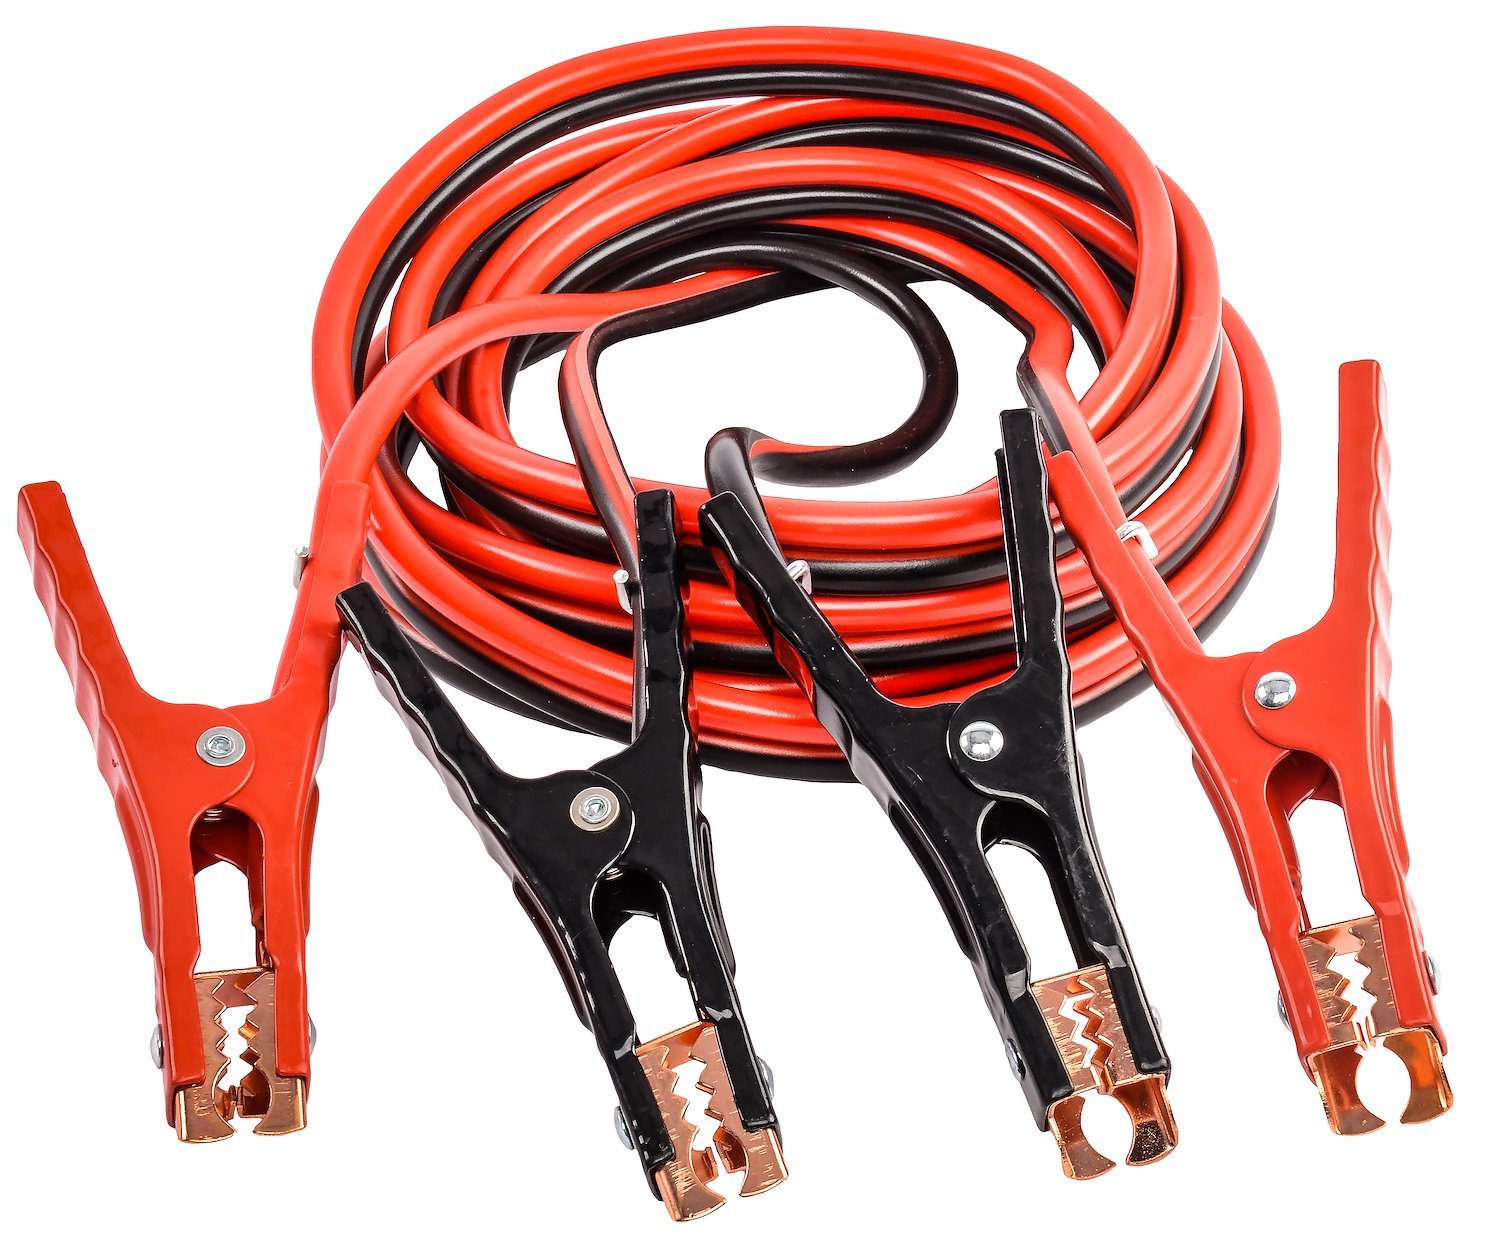 High Quality 16 ft. Jumper Cables [4-gauge with 500 Amp Rating]